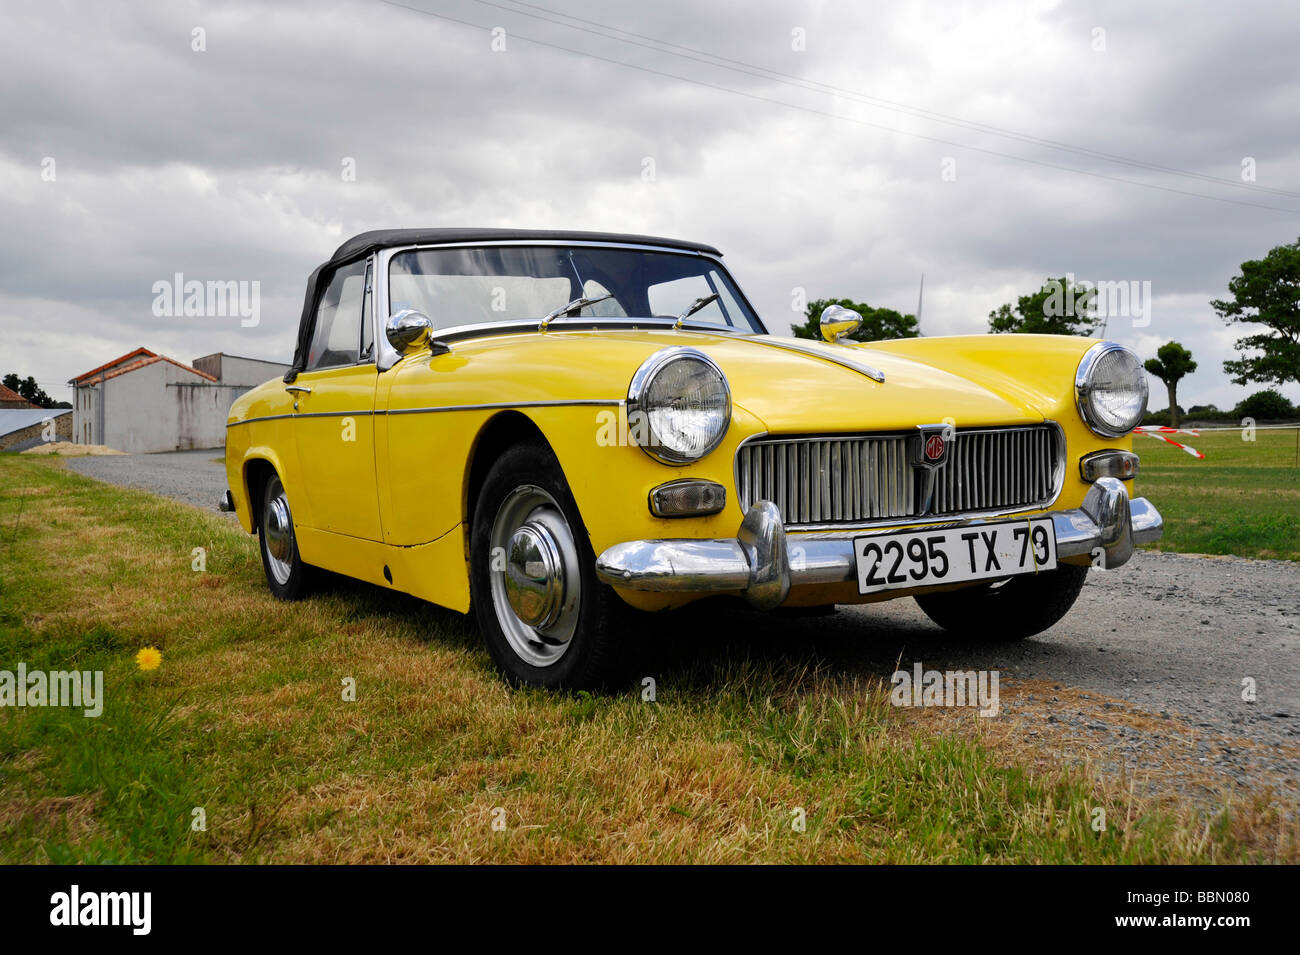 Old Classic MG Sports Convertible Automobile Car Stock Photo